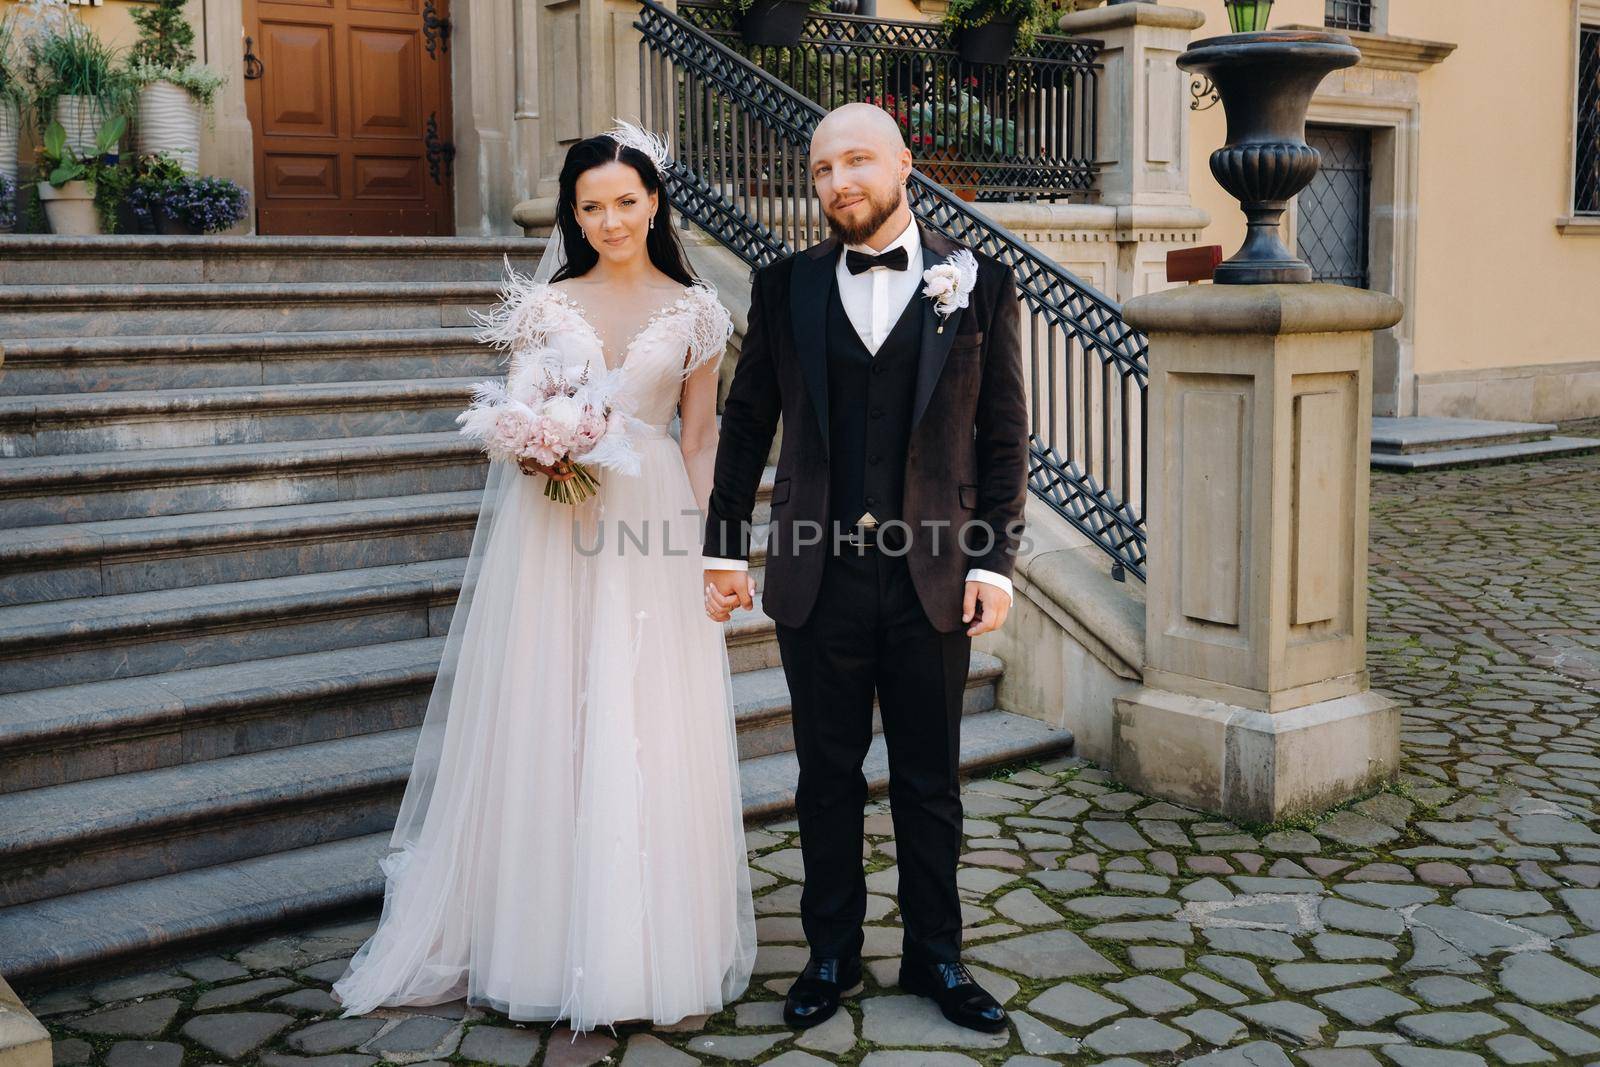 The bride and groom walk up the stairs of the Nesvizh Castle.The wedding couple descend from the stairs of the palace by Lobachad